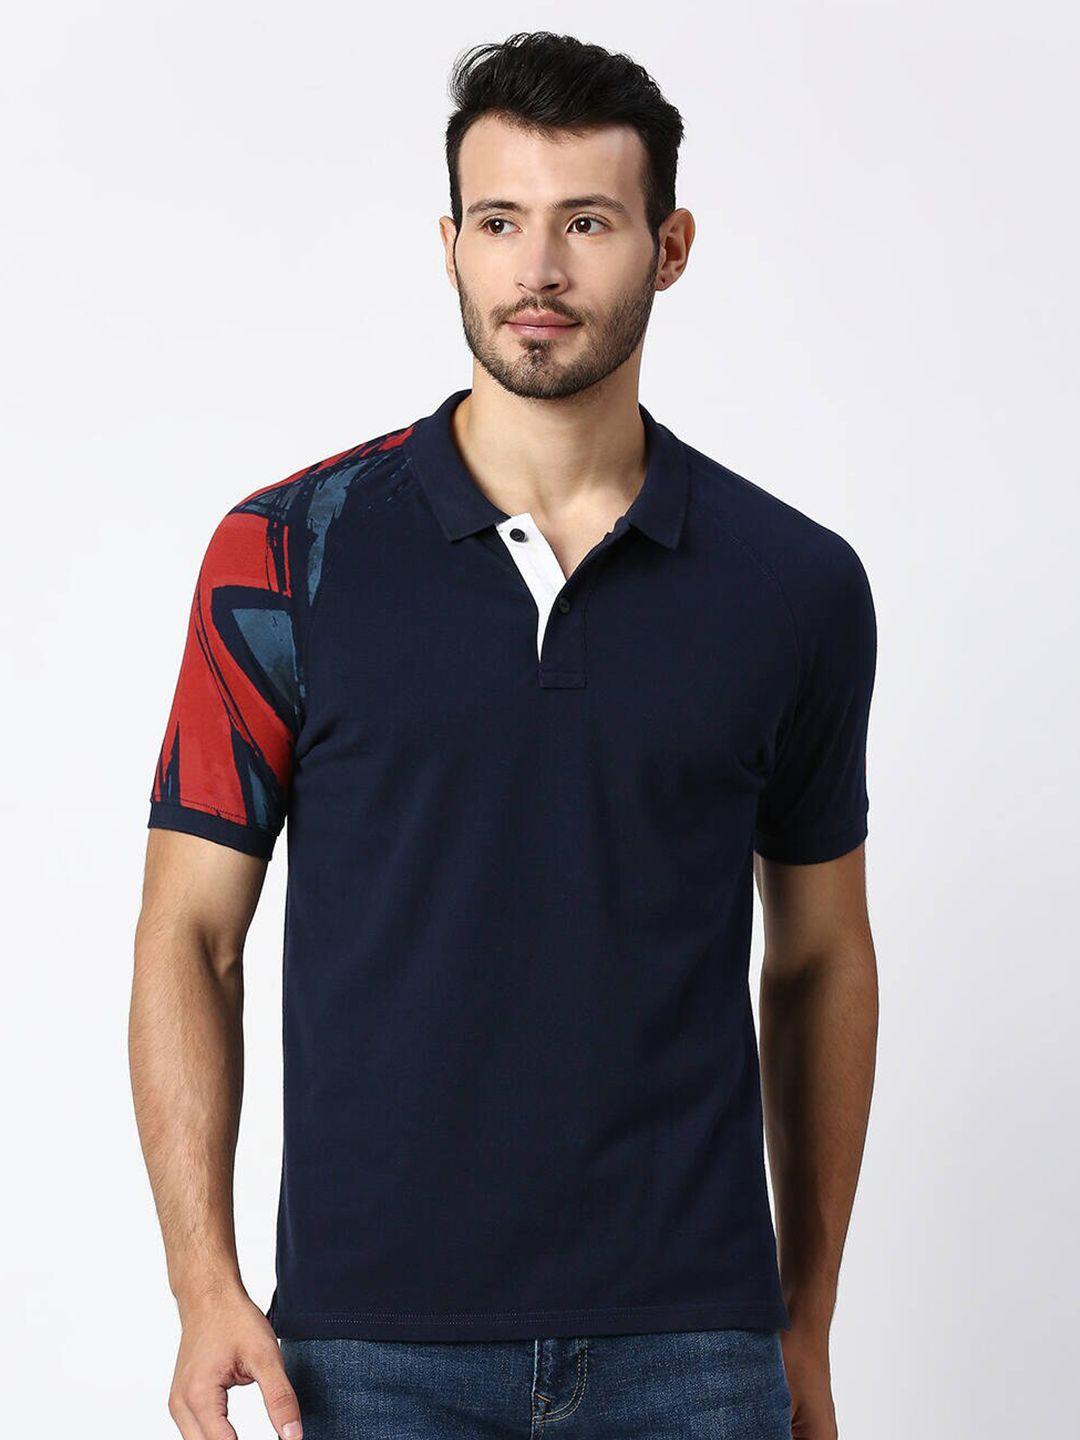 pepe-jeans-men-navy-blue-&-red--printed-polo-collar-cotton-t-shirt